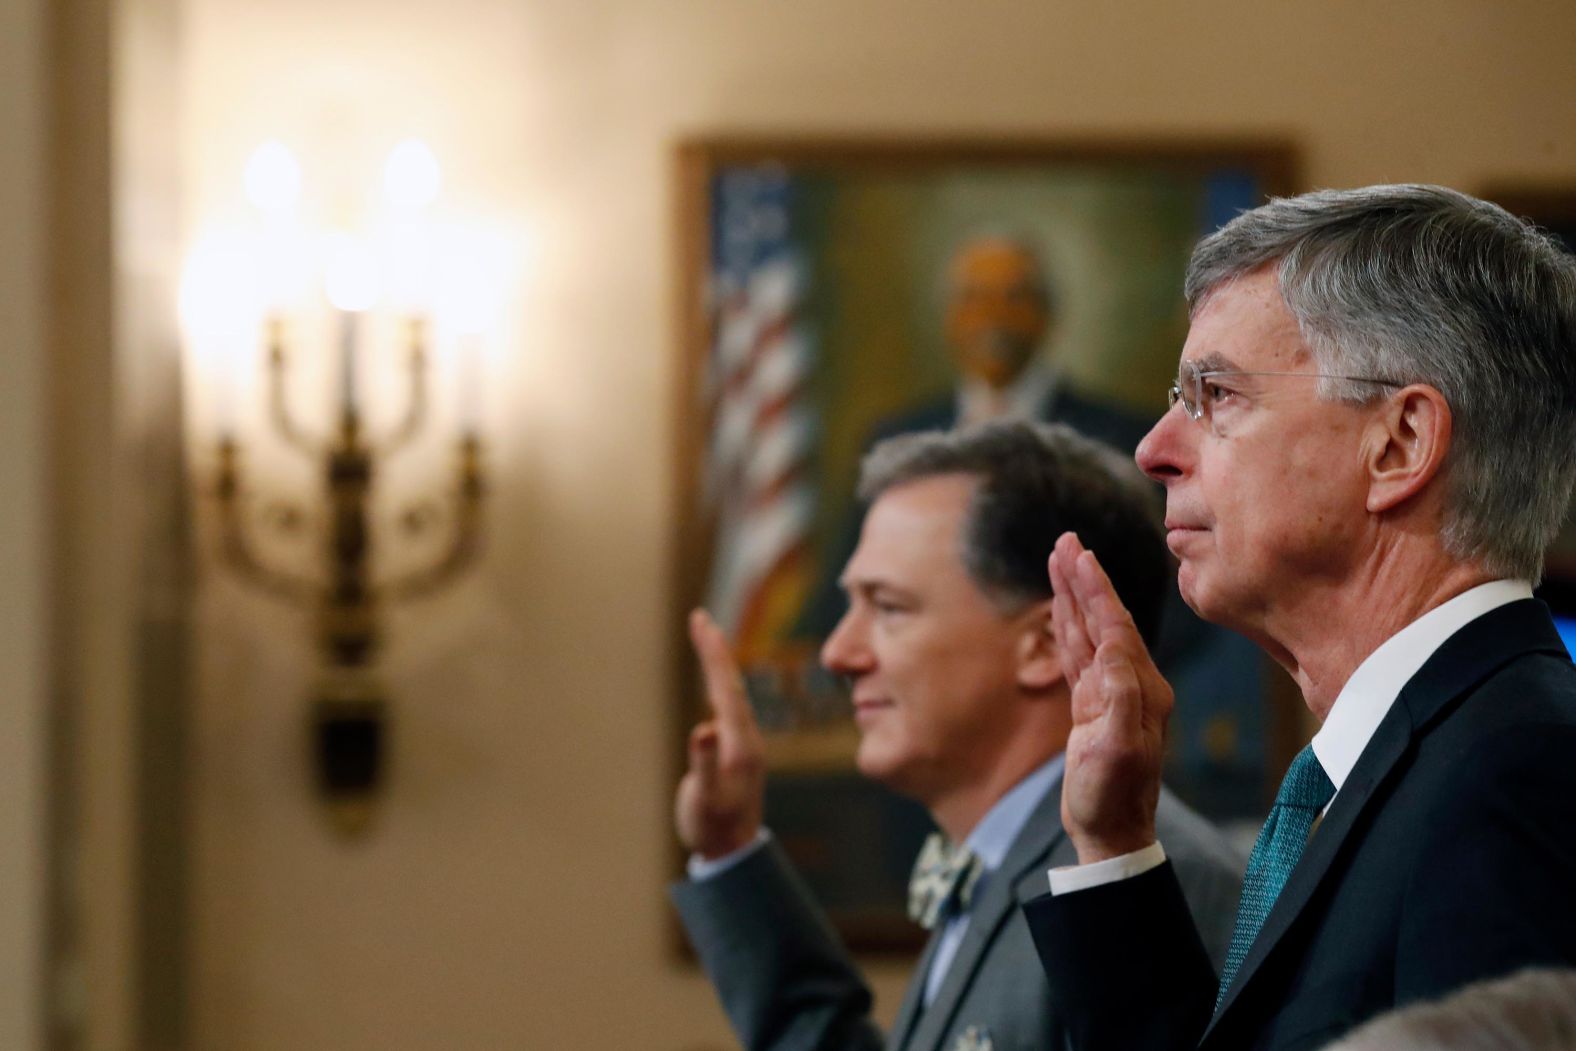 From right, diplomats Bill Taylor and George Kent are sworn in before testifying to the House Intelligence Committee on November 13. It was the <a href="index.php?page=&url=https%3A%2F%2Fwww.cnn.com%2F2019%2F11%2F13%2Fpolitics%2Fpublic-impeachment-hearings-day-1%2Findex.html" target="_blank">first public hearing</a> related to the inquiry. Taylor is the top US diplomat in Ukraine. Kent is the deputy assistant secretary at the State Department's Bureau of European and Eurasian Affairs.